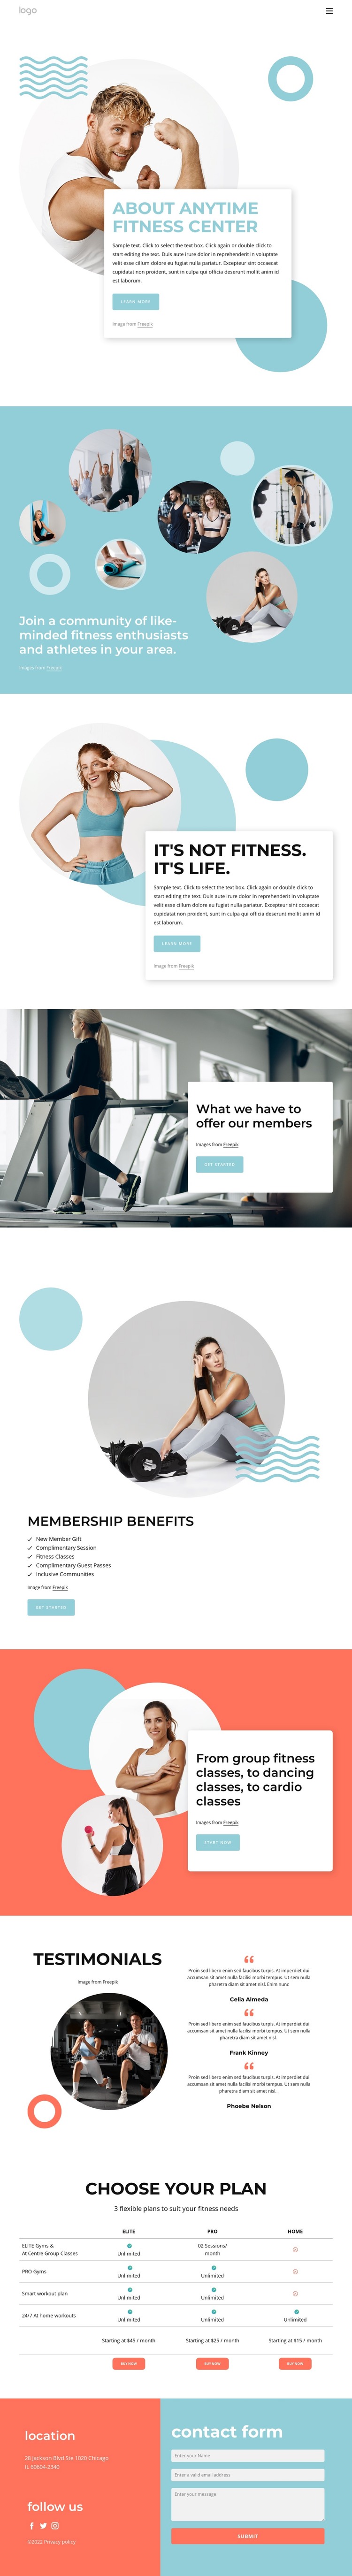 About Anytime fitness center HTML Template